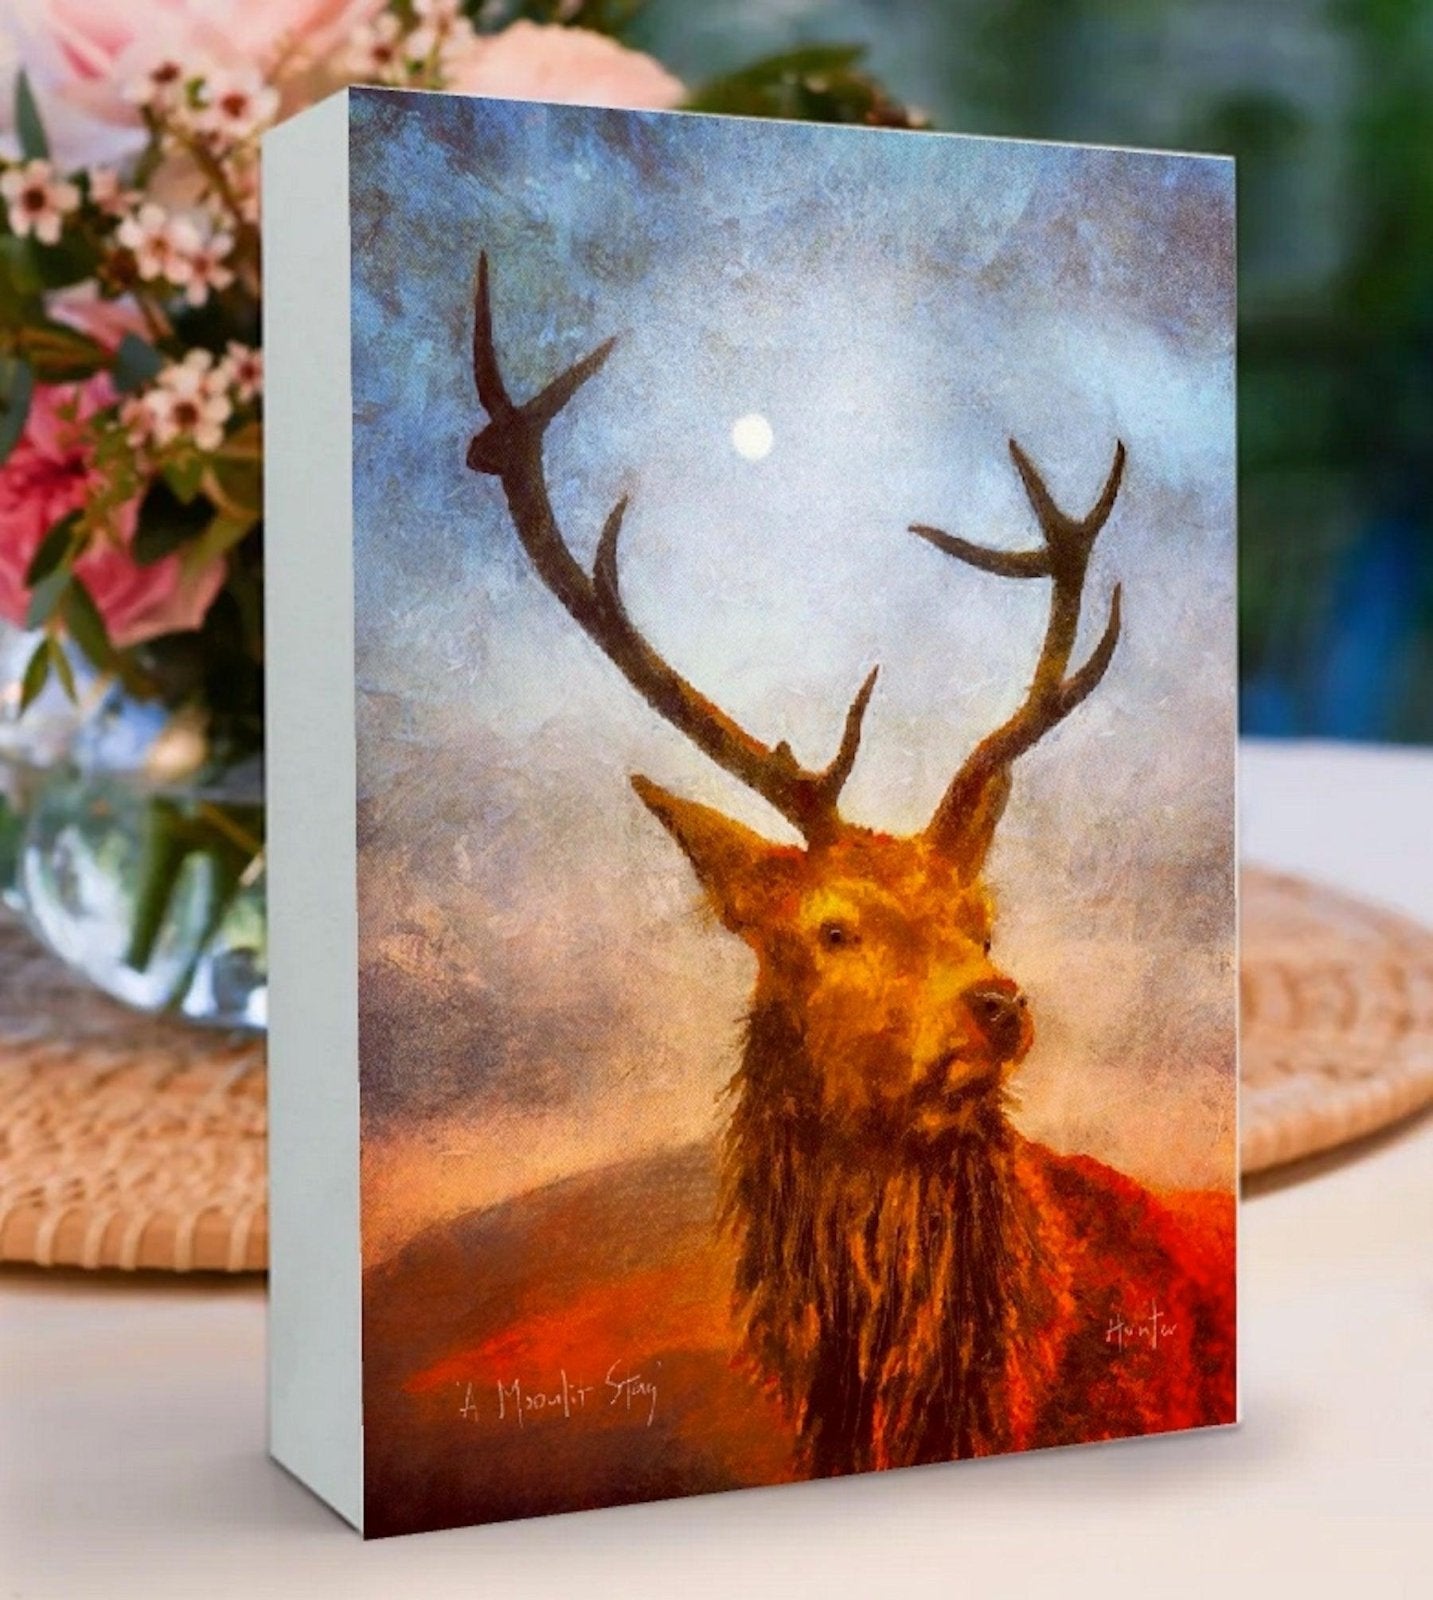 The Moonlit Highland Stag Wooden Art Block-Wooden Art Blocks-Scottish Highlands & Lowlands Art Gallery-Paintings, Prints, Homeware, Art Gifts From Scotland By Scottish Artist Kevin Hunter